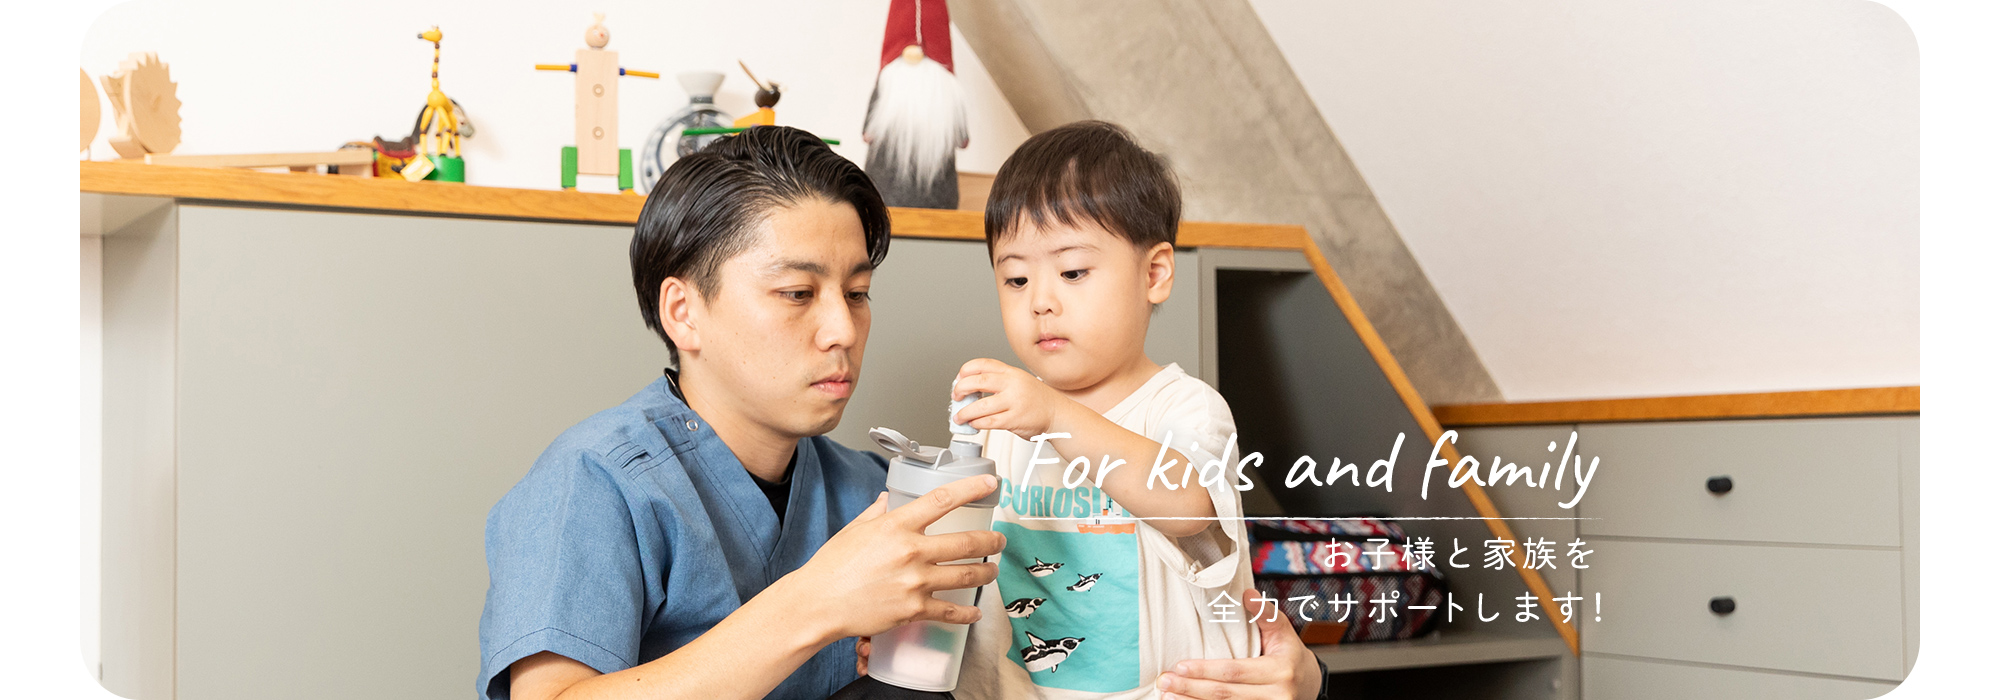 For kids and family お子様と家族を全力でサポートします！